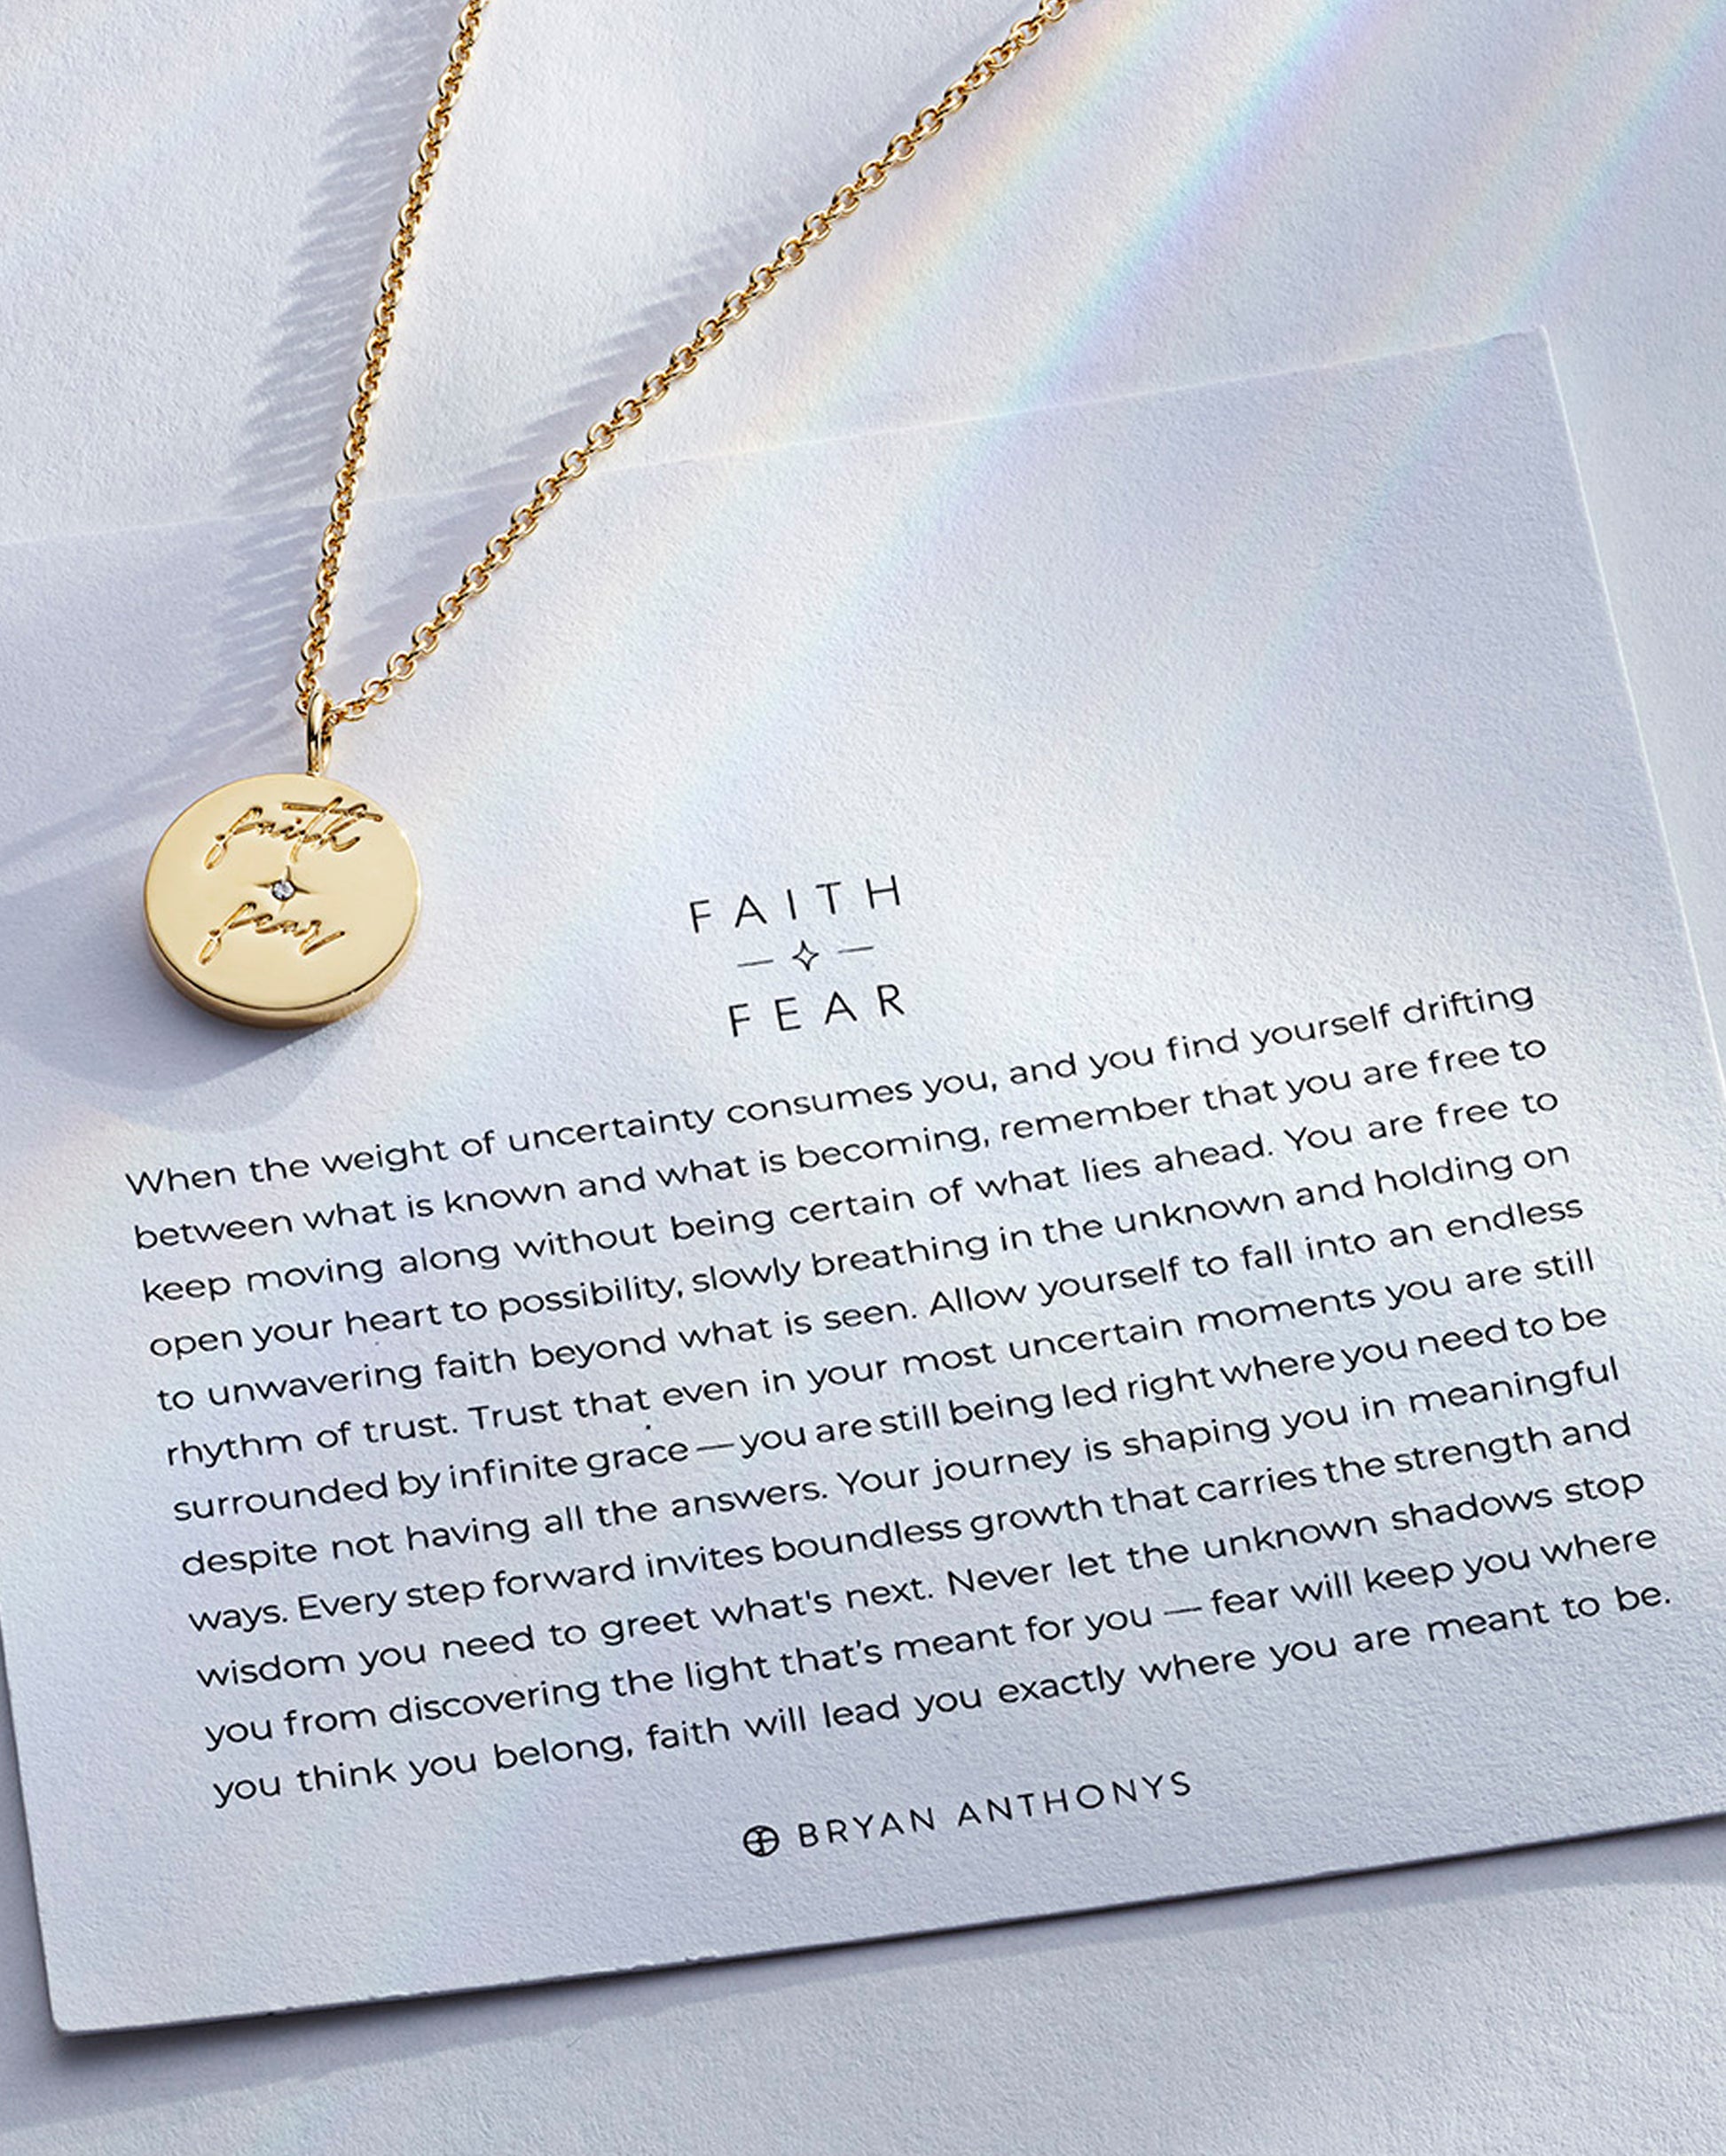  Faith Necklace I Surrender All Bronze Jewelry for Women Chain  36 - Handmade Hymn Sheet Music Pendant, Music Note Charm, Affectionately  Boxed Encouragement Gift with Meaningful Message of Hope Card 